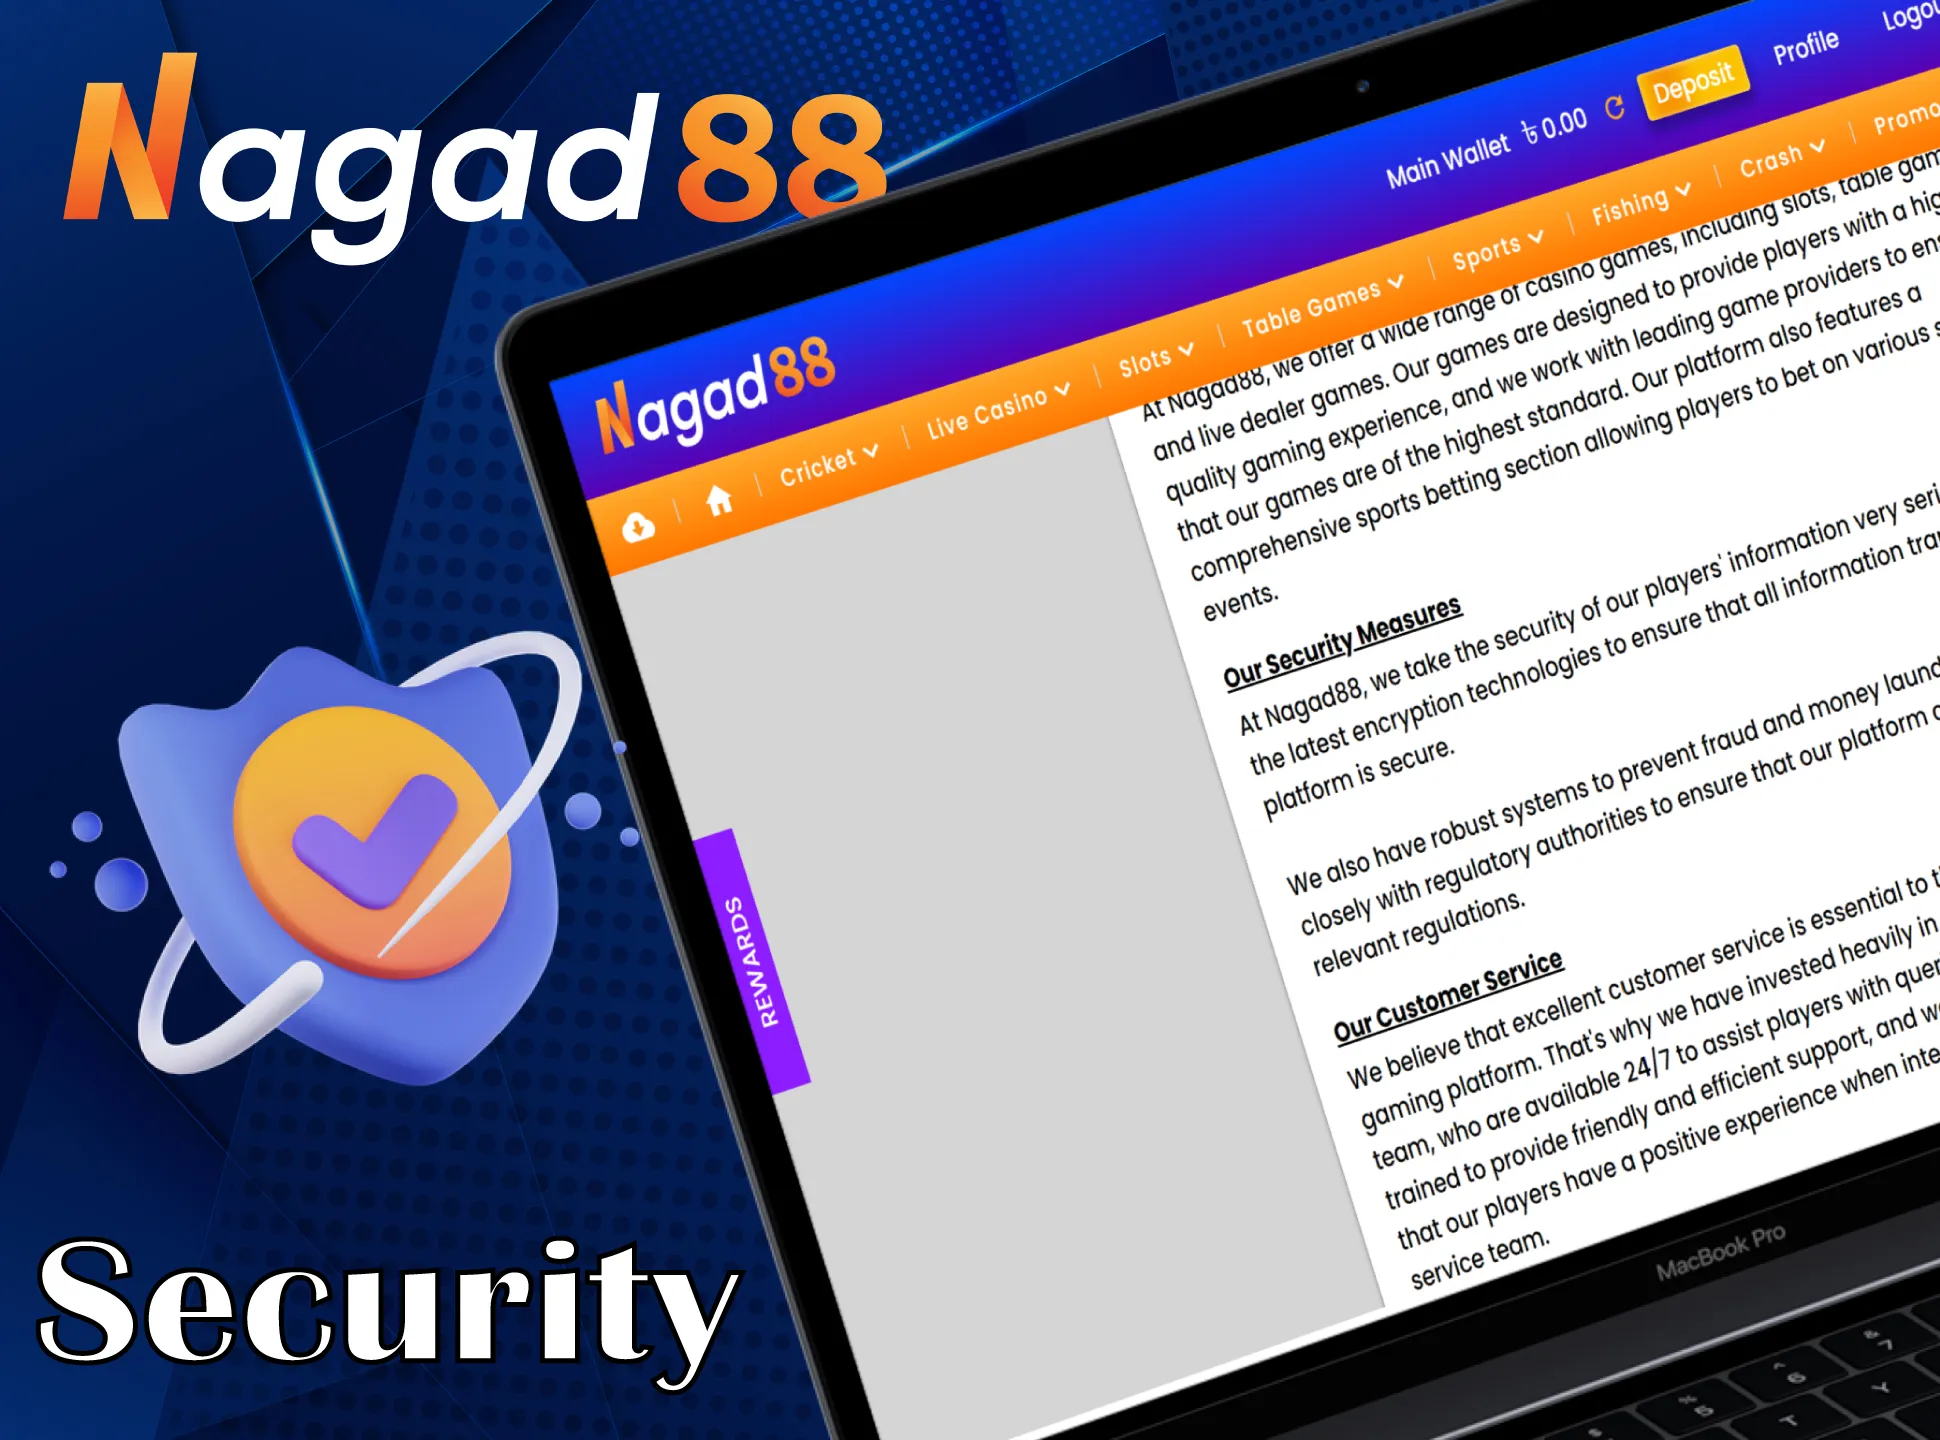 Nagad88 is secure for users.